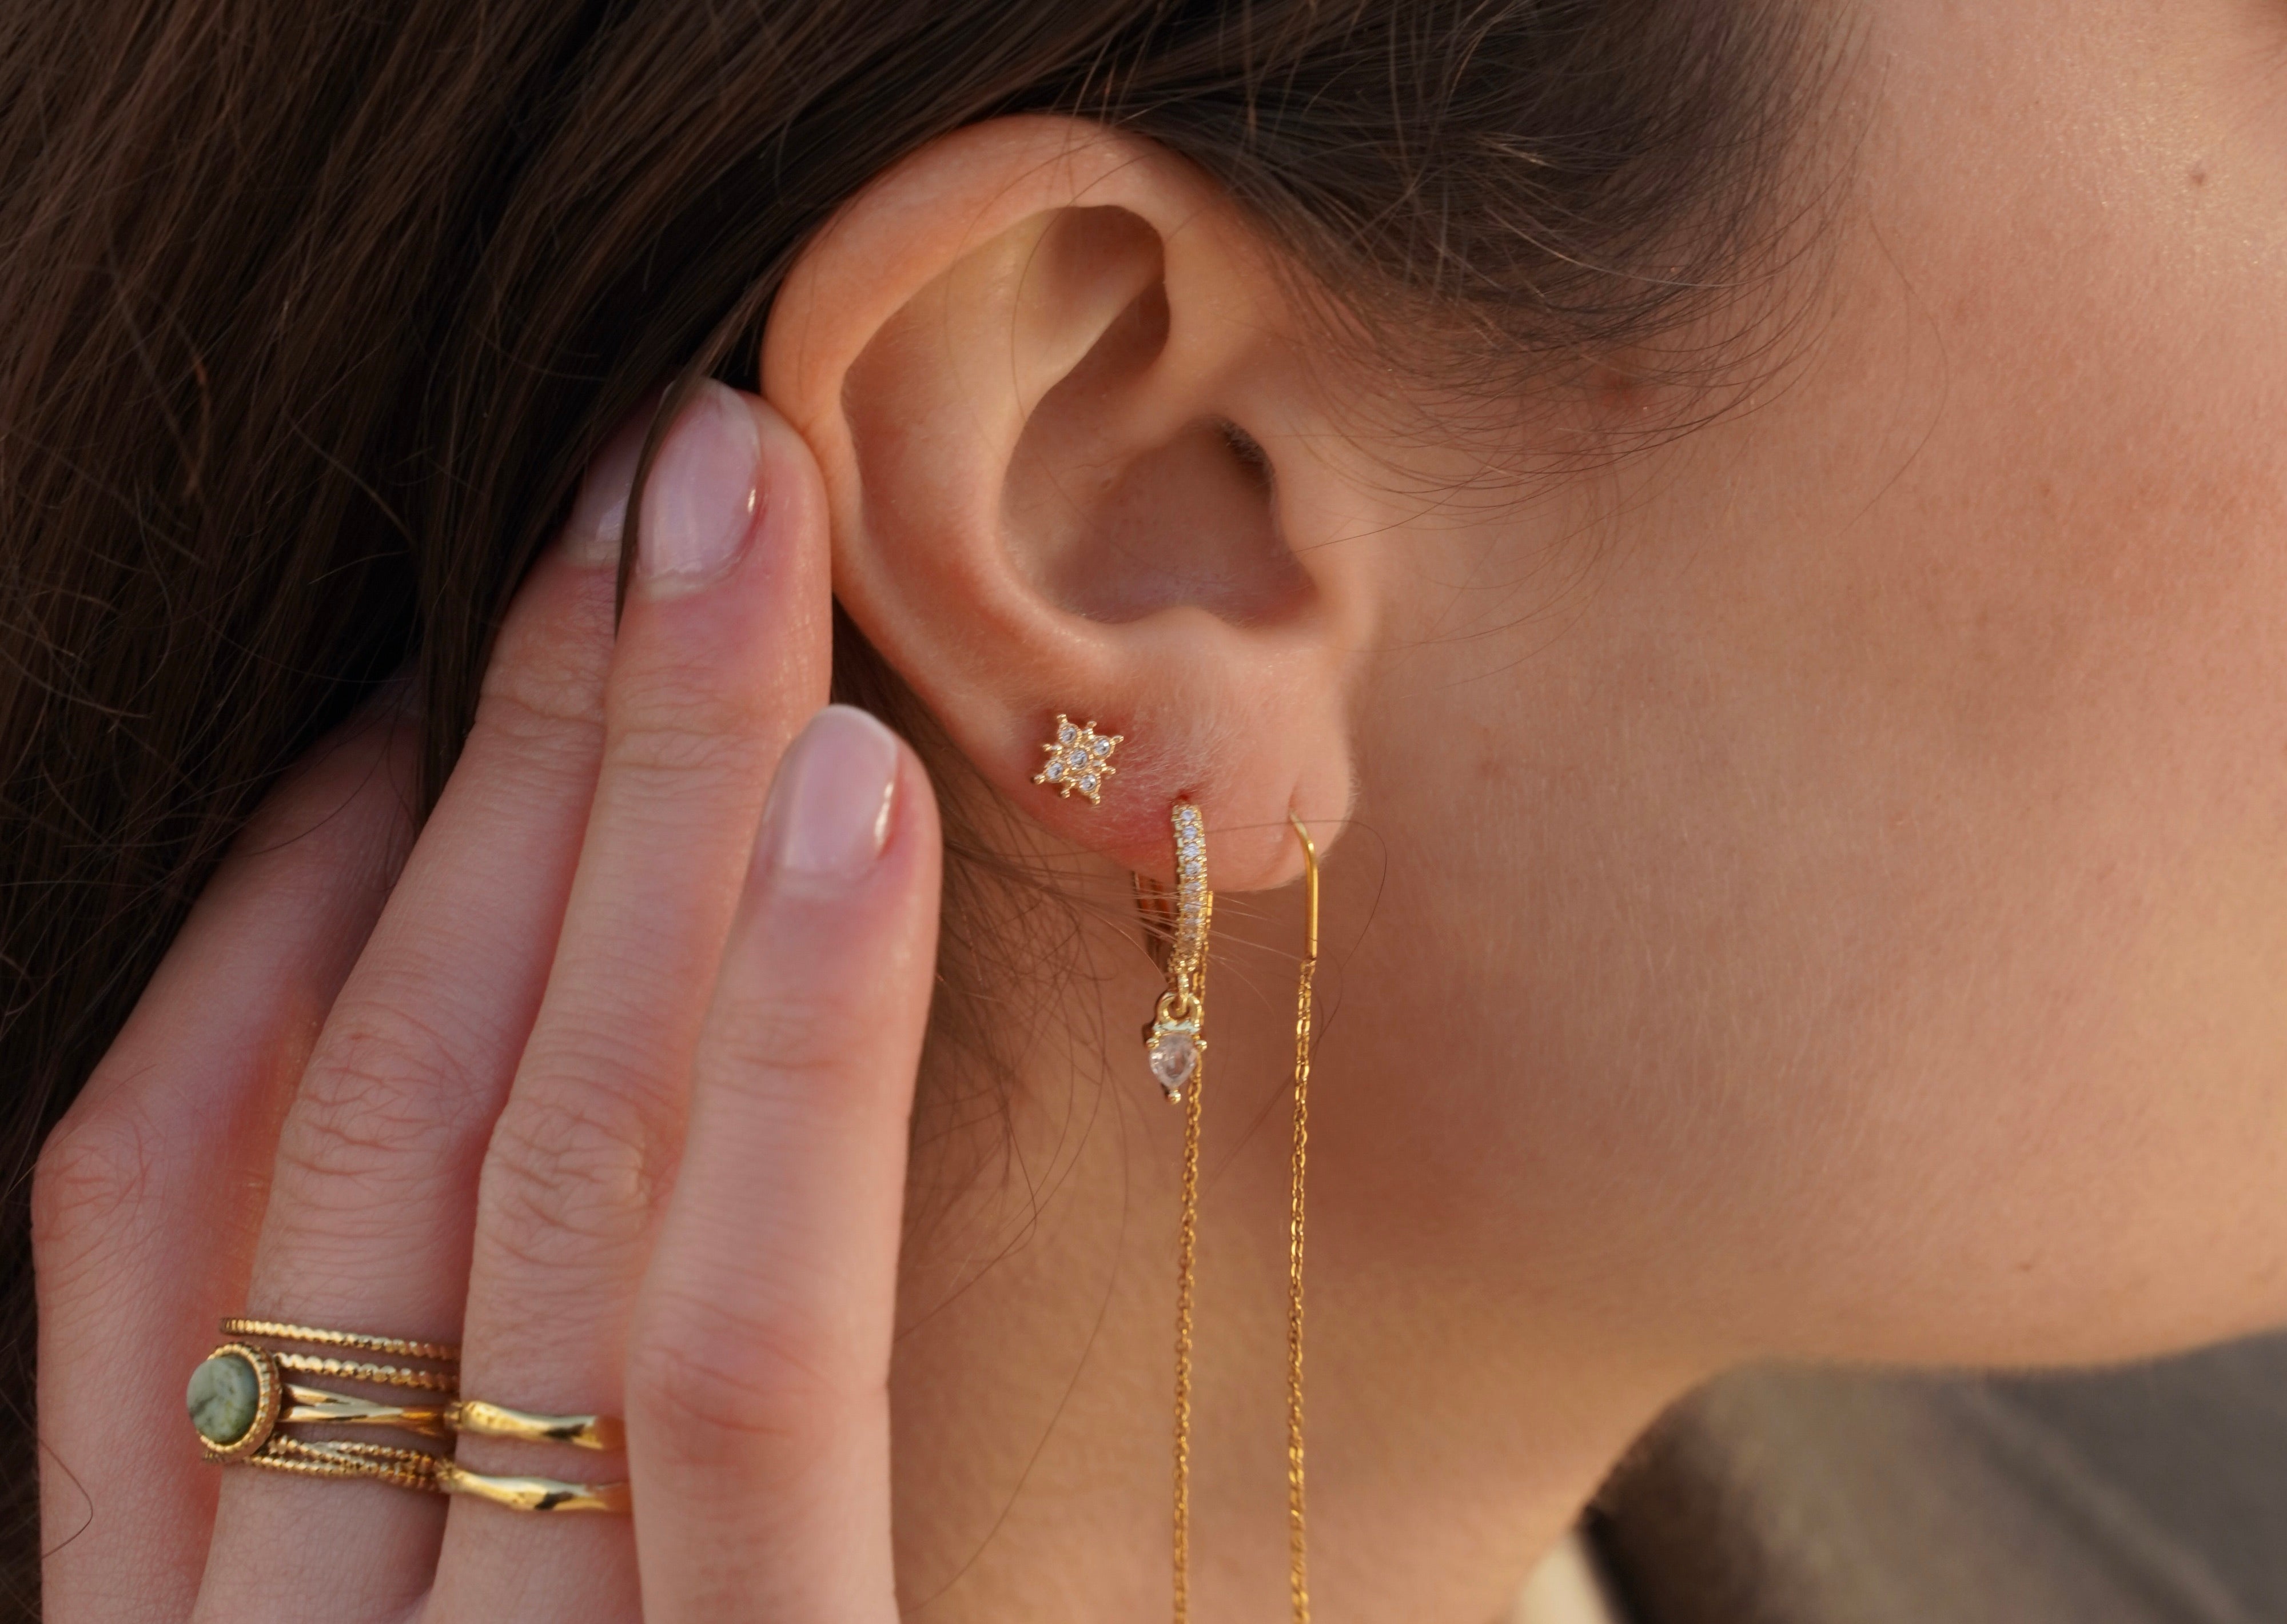 What Are The Most Flattering Earrings For Your Face Shape?